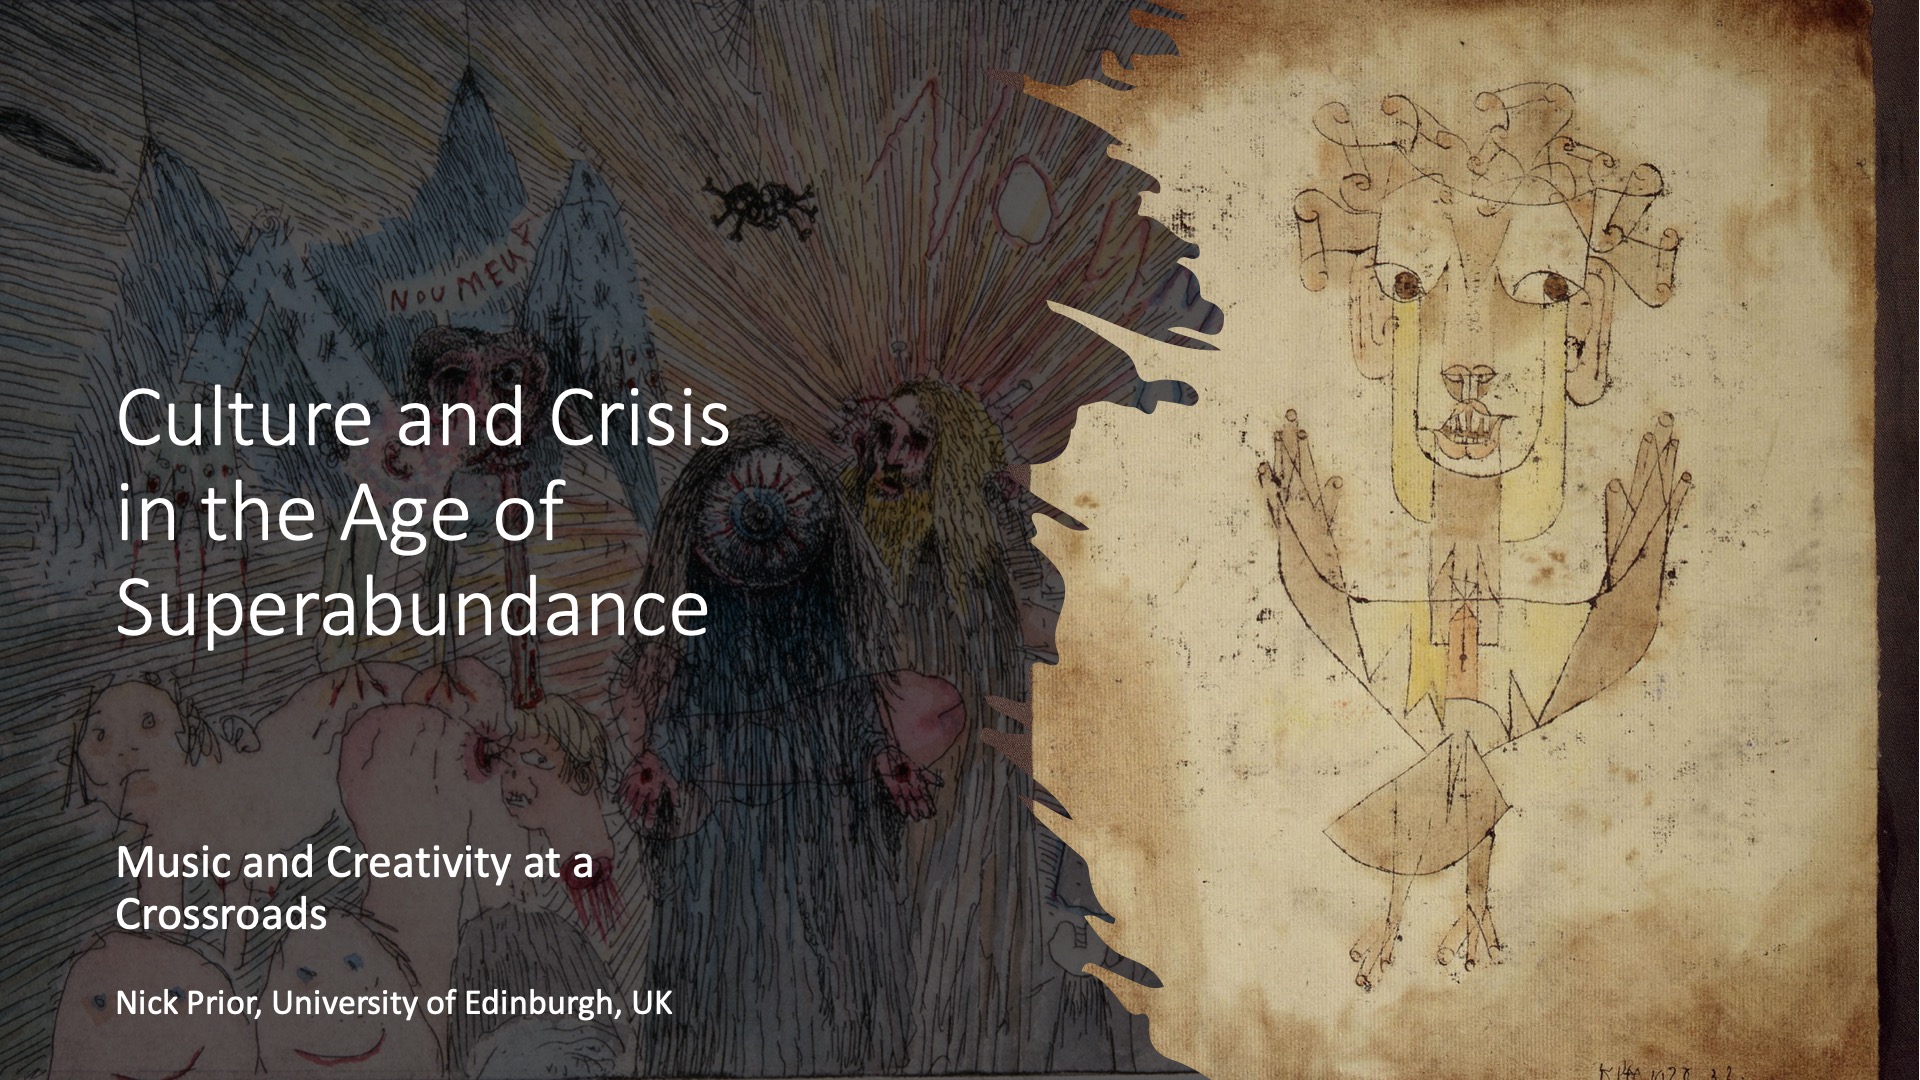 Special Lecture：Nick Prior “Culture And Crisis In The Age Of Superabundance: Music And Creativity At A Crossroads”